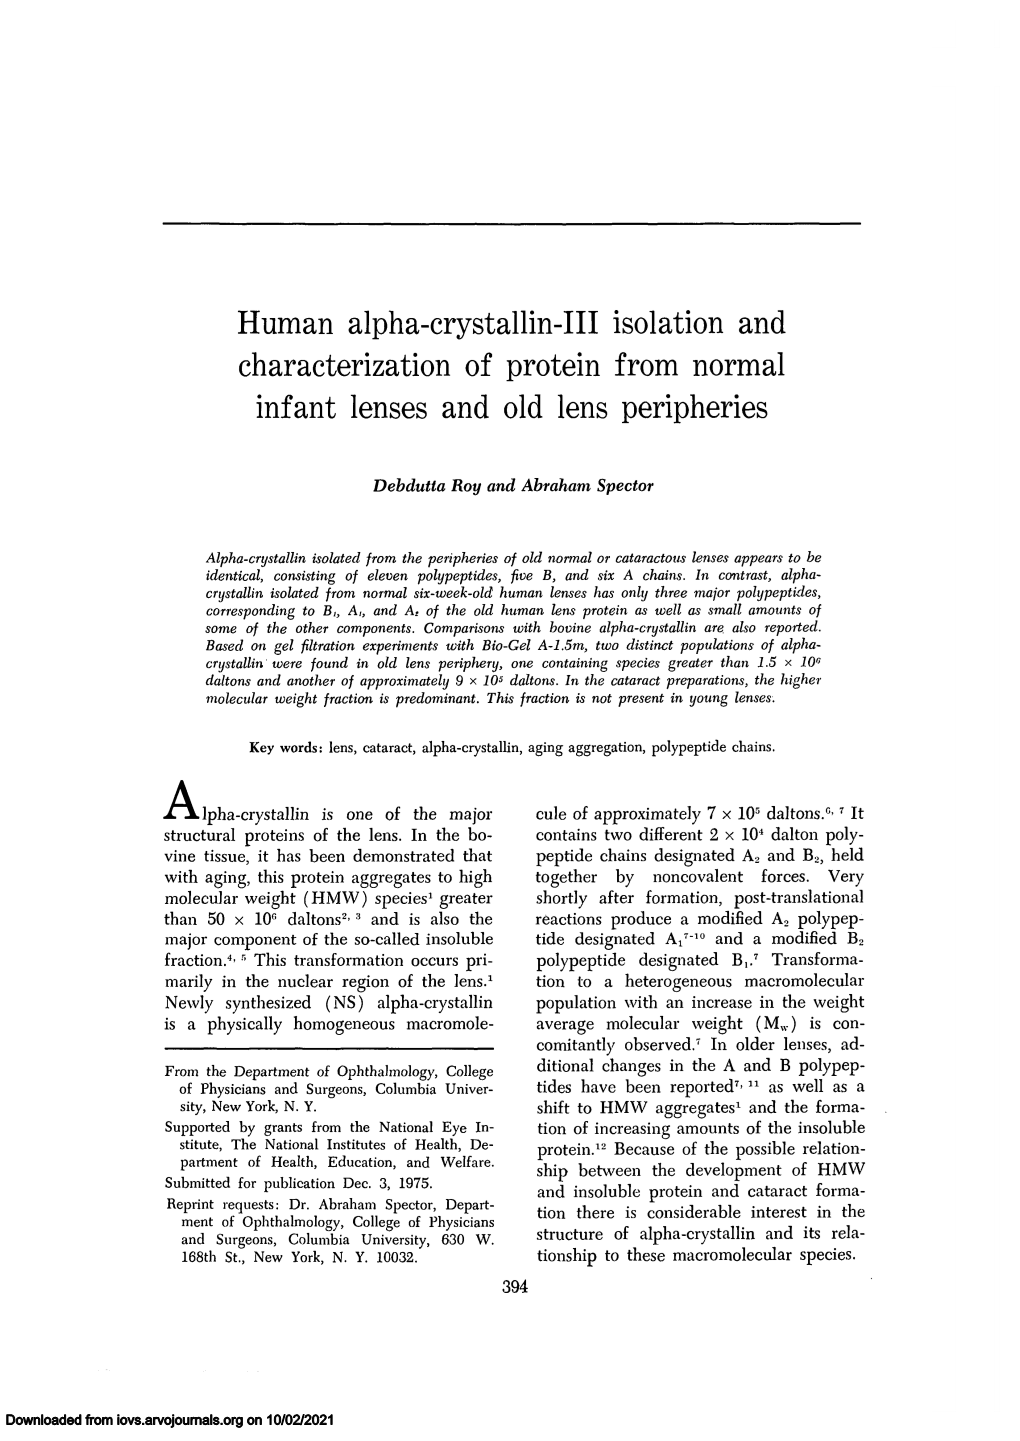 Human Alpha-Crystallin-III Isolation and Characterization of Protein from Normal Infant Lenses and Old Lens Peripheries